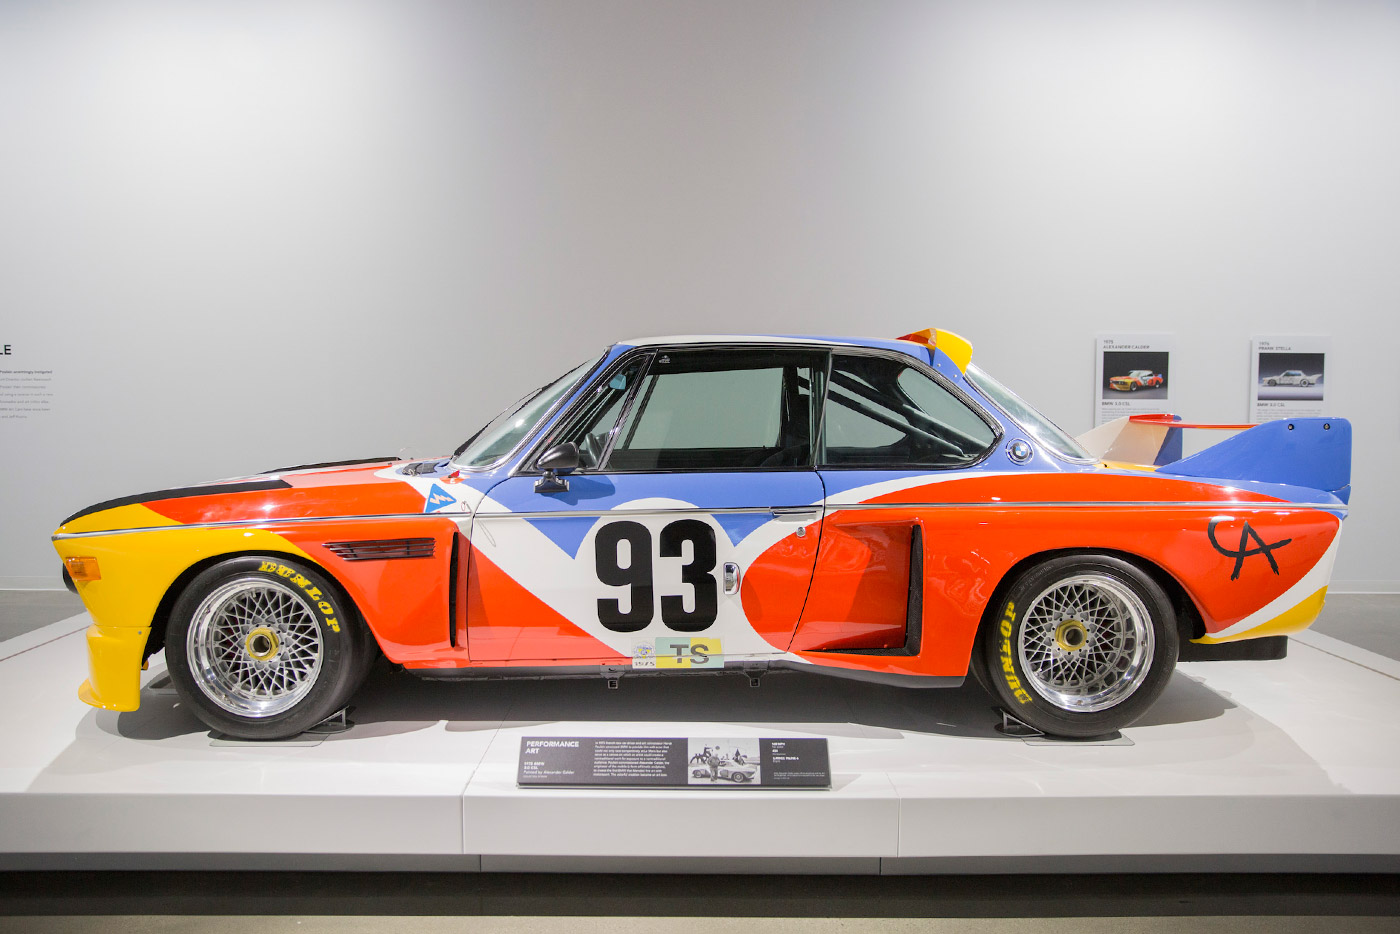 The museum houses several BMW Art Cars, including a 1975 BMW 3.0 CSL swathed in Alexander Calder&#x2019;s brilliant primary colors (pictured) and a 1995 BMW 850 CSi as reimagined by David Hockney